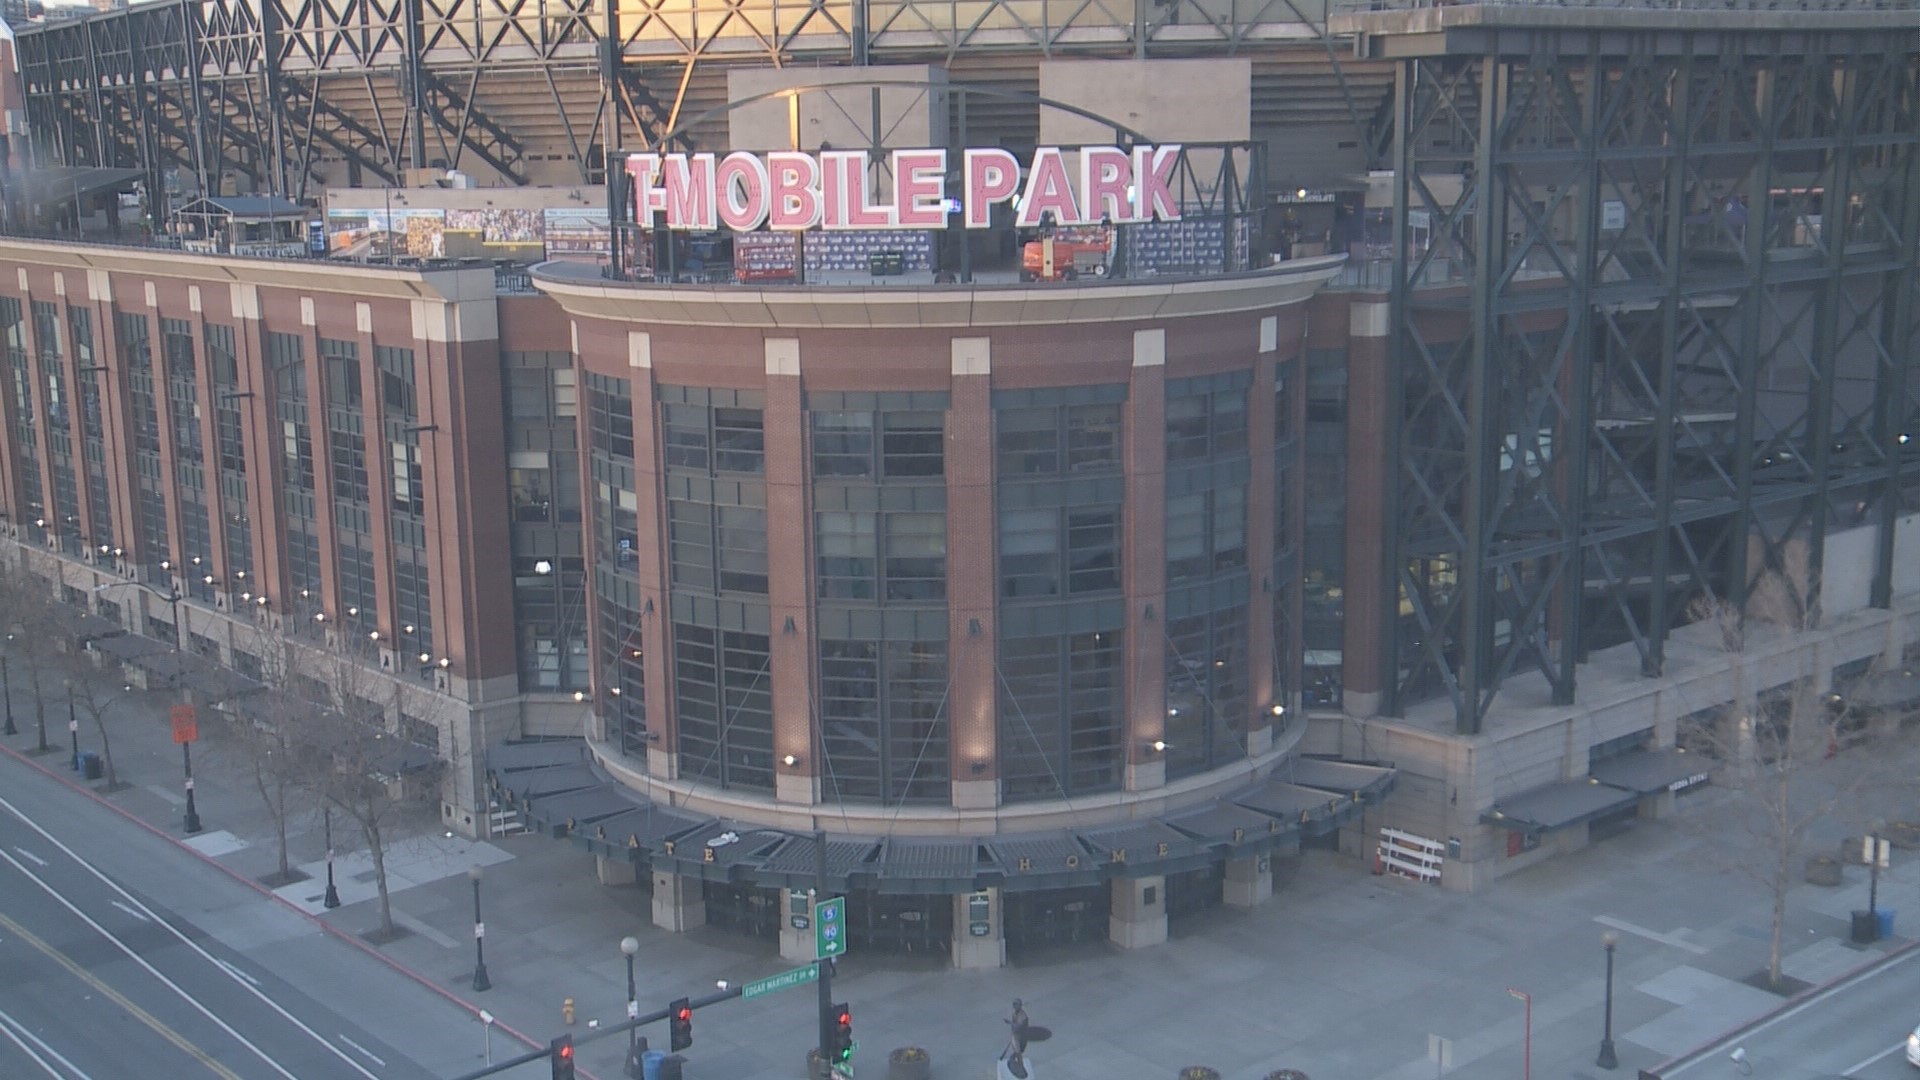 The transformation is complete.  The home of the Seattle Mariners is now T-Mobile Park for all to see.  The new signage went up over the course of one afternoon.